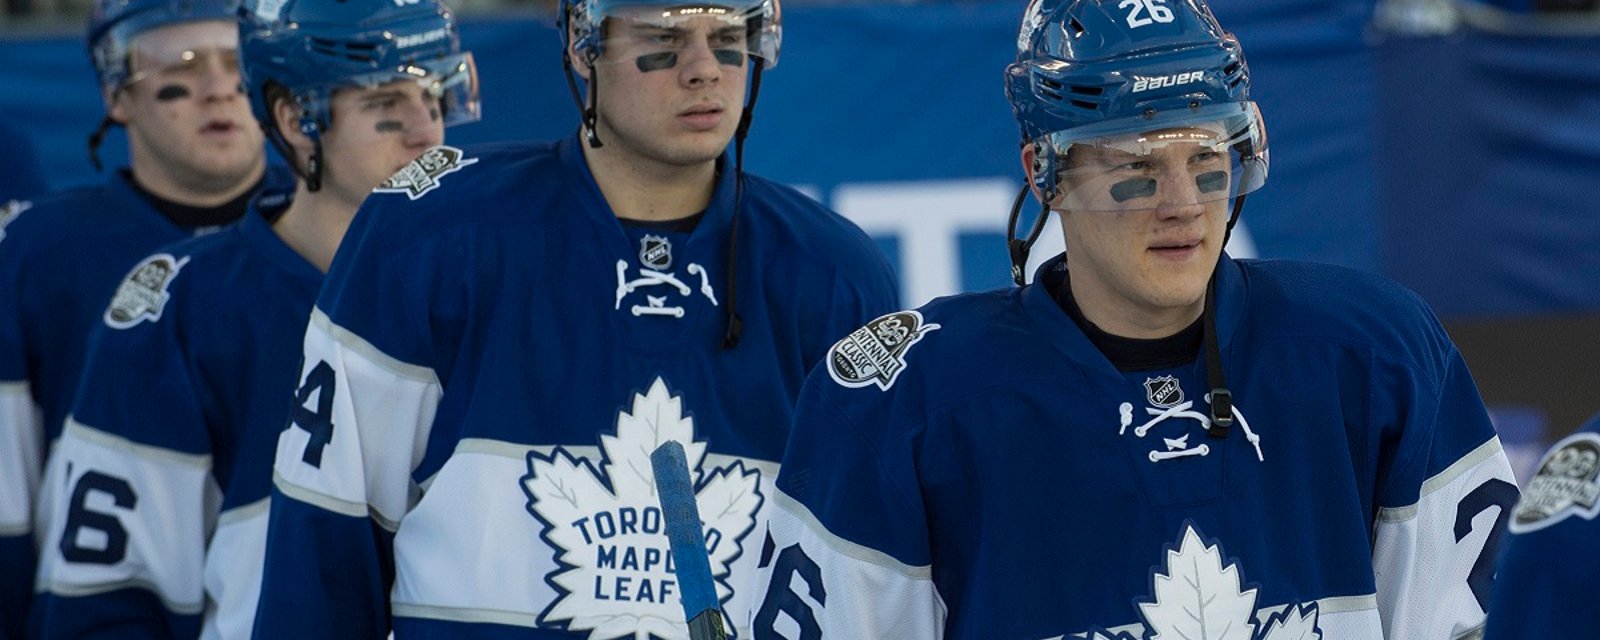 Breaking: Leafs player not cleared to play this season due to concussion problems.